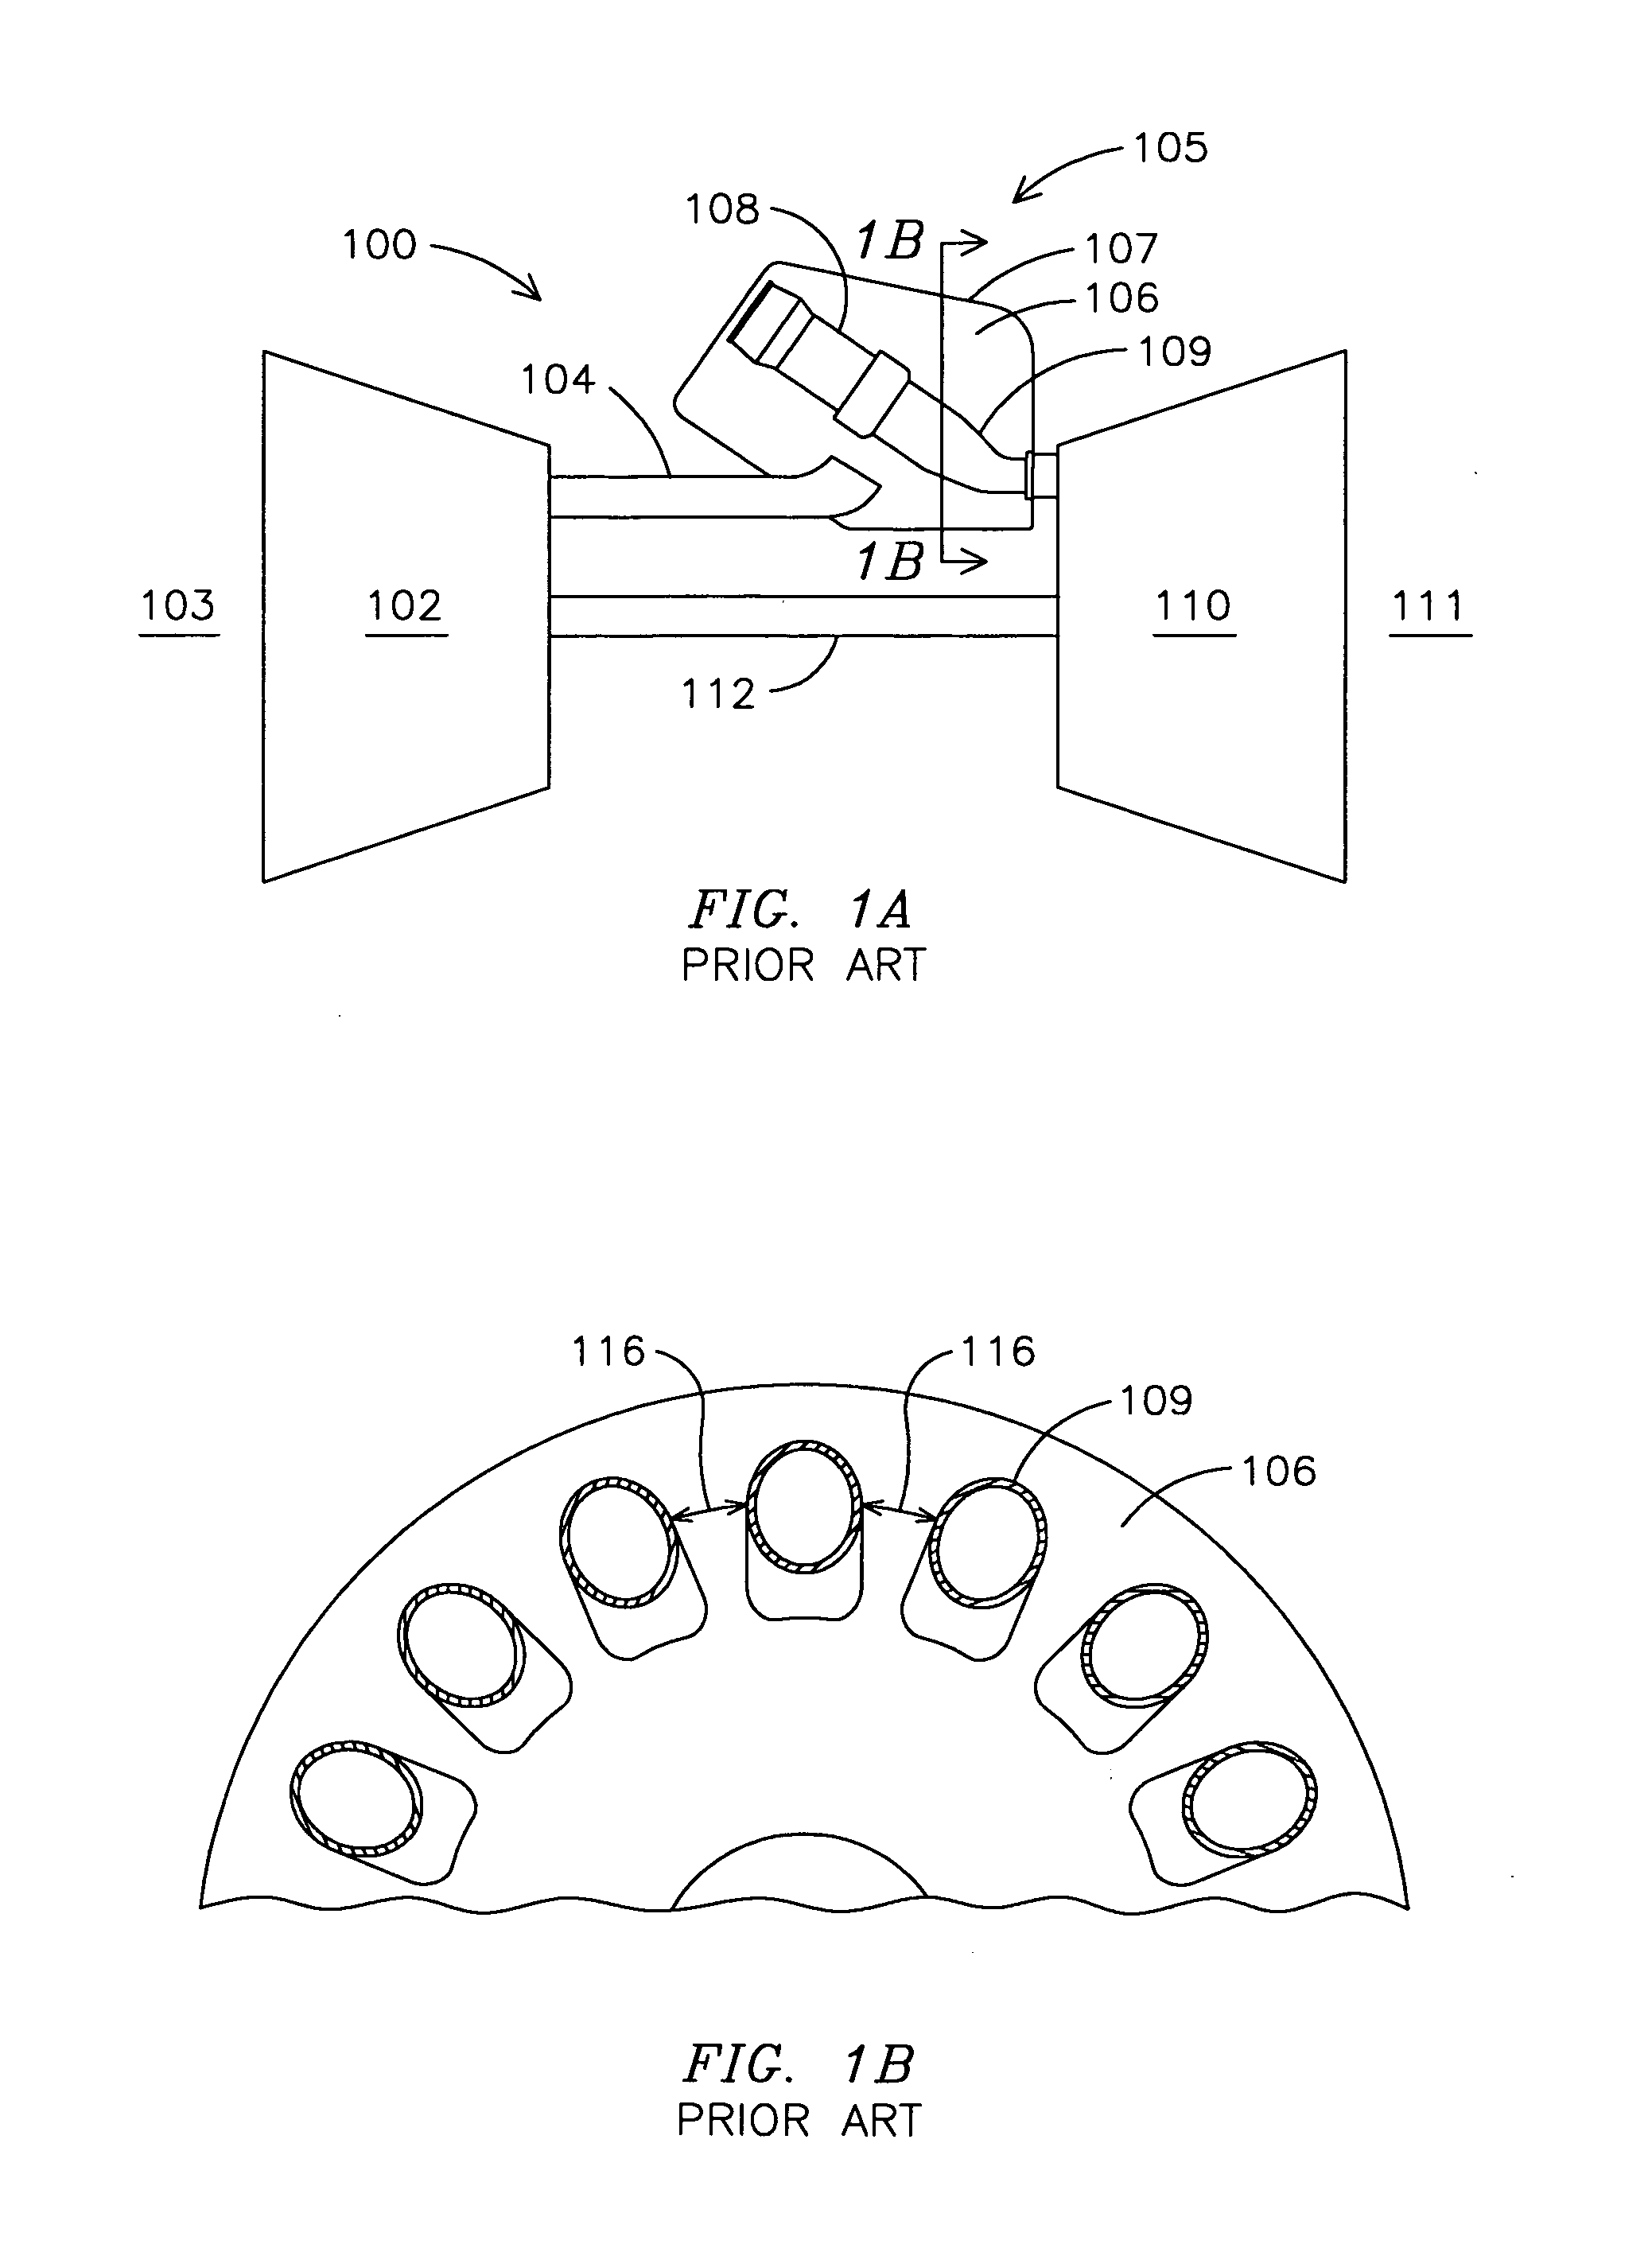 Fluid flow distributor apparatus for gas turbine engine mid-frame section